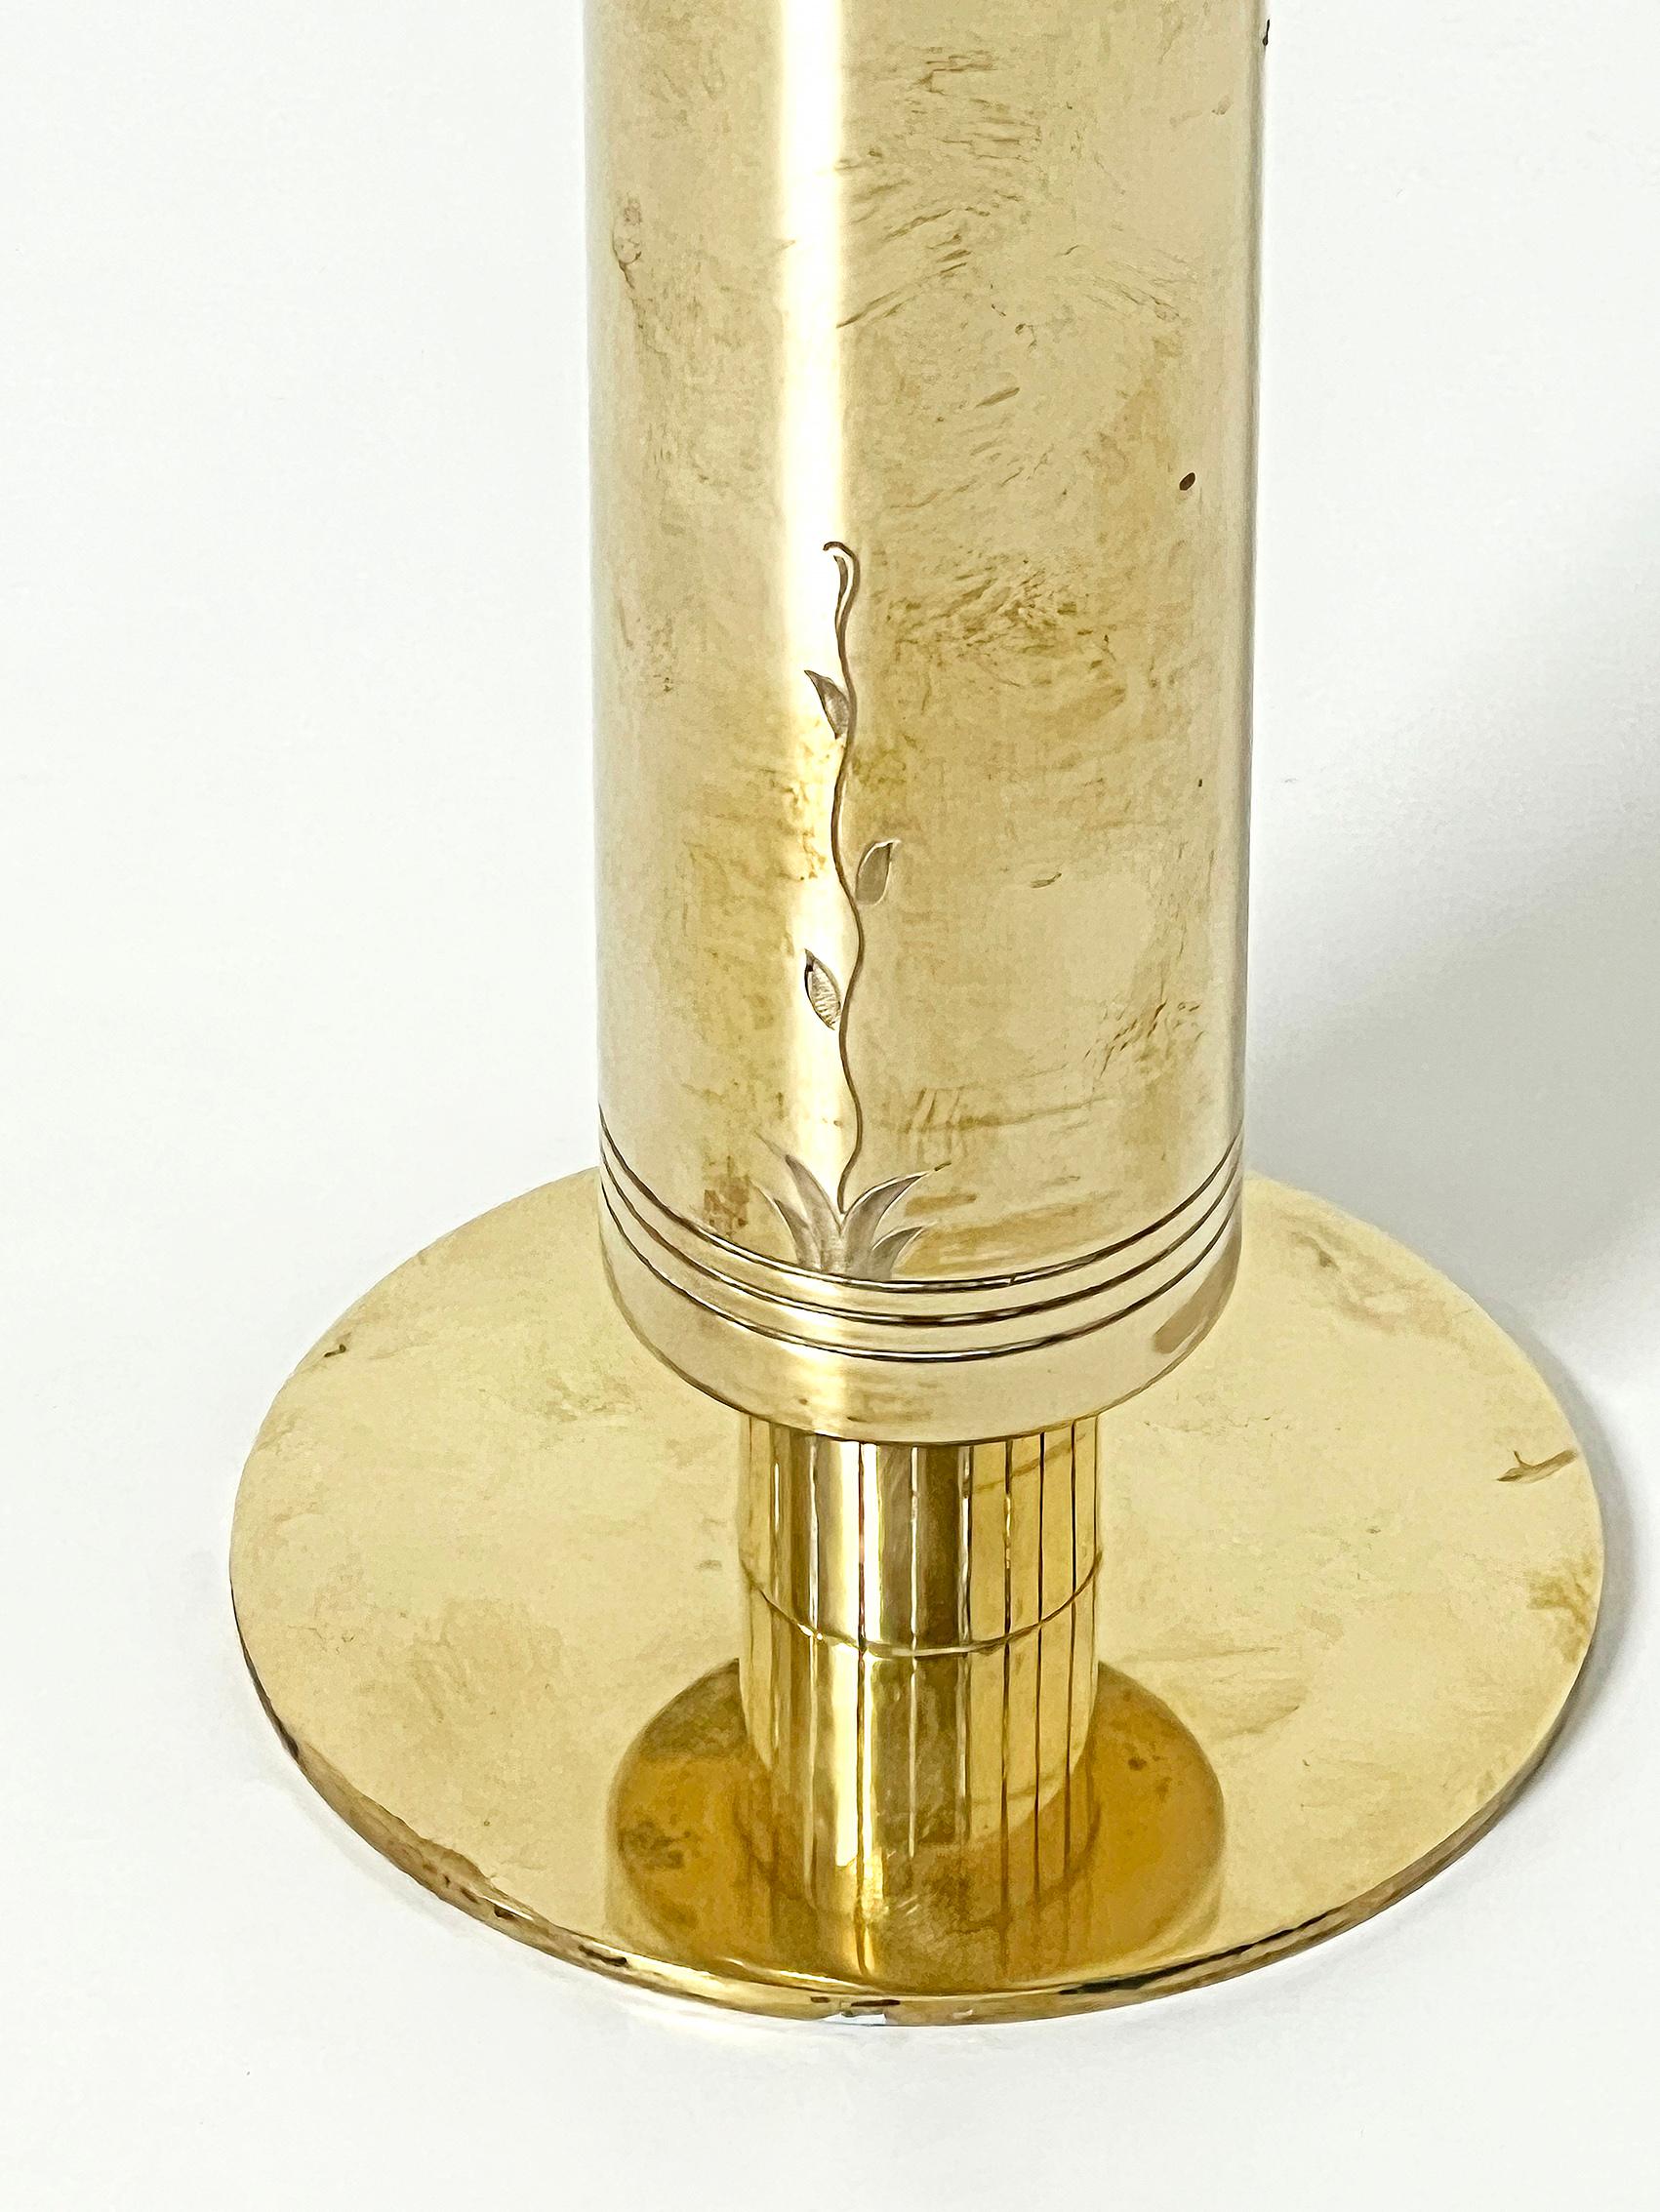 20th Century Beautiful Scandinavian Modern Vase in Brass, Anonymous, ca 1950-1960's For Sale